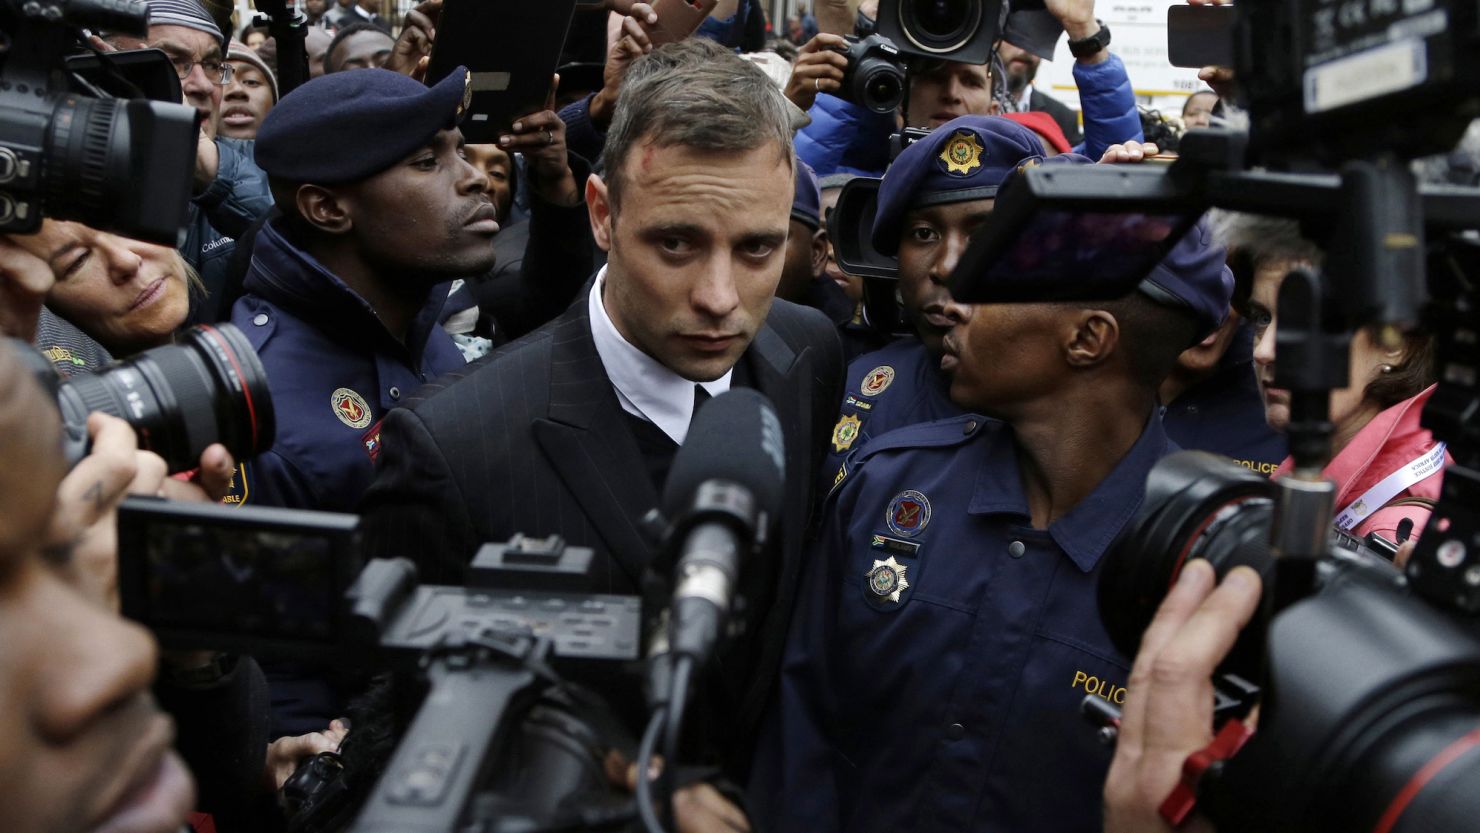 ‘Blade Runner’ Pistorius leans towards cleaning local church for community service